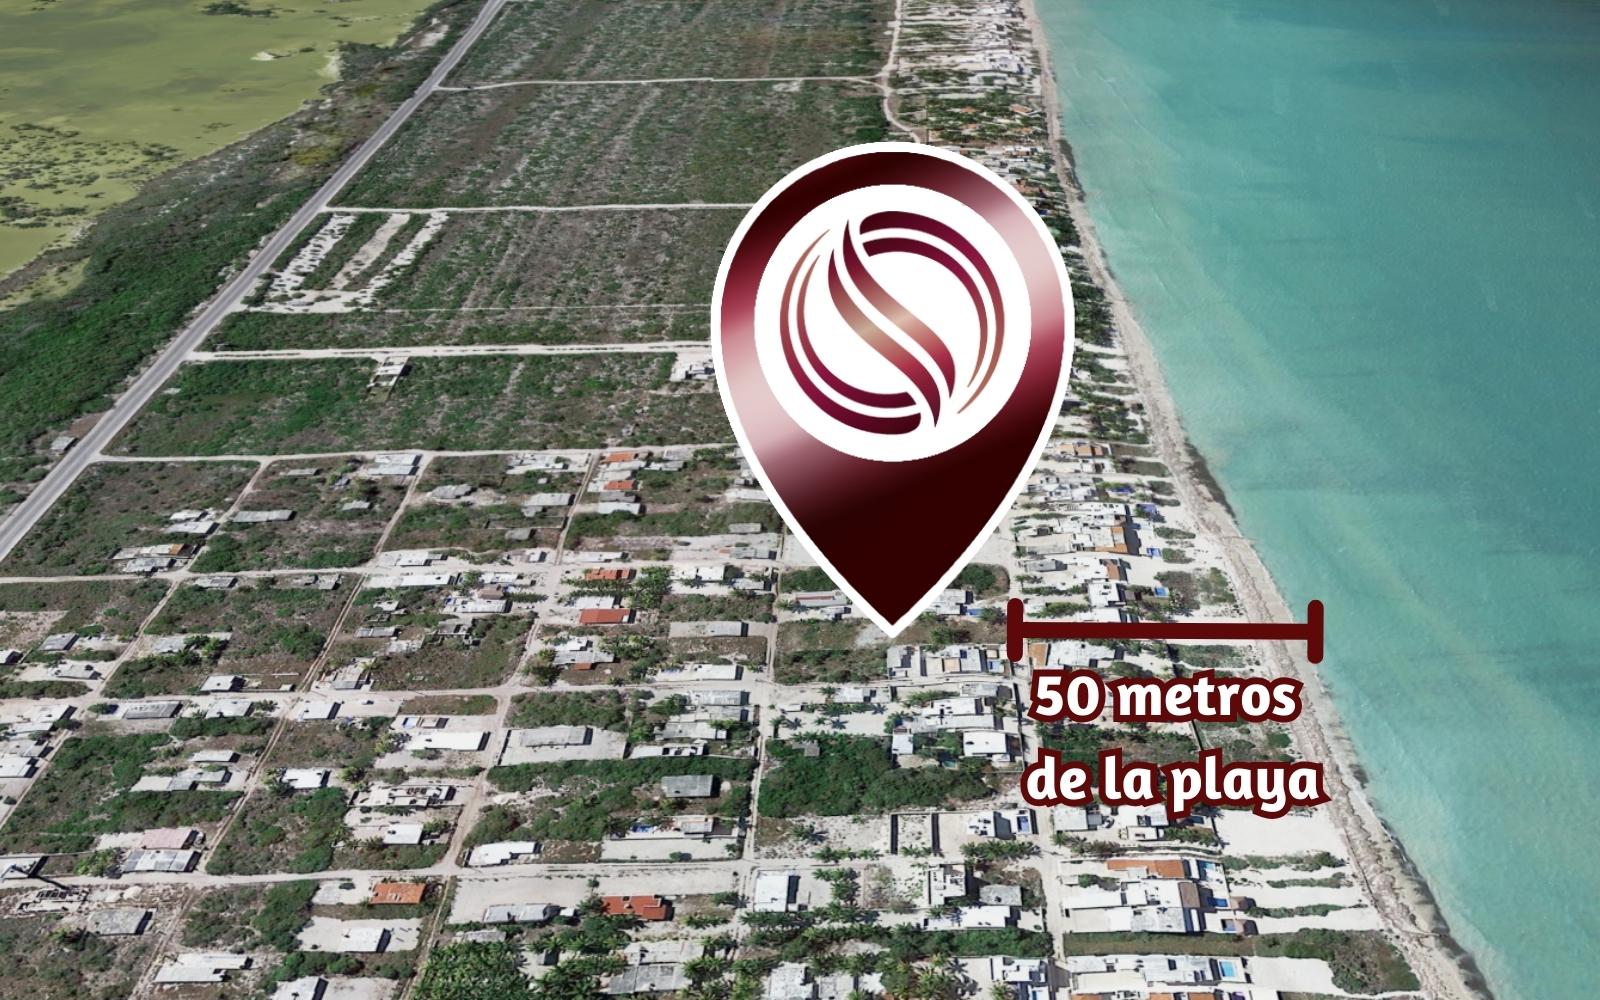 Condominium with access to the beach and beach club, green areas and amenities, pre-construction for sale Chicxulub Yucatan